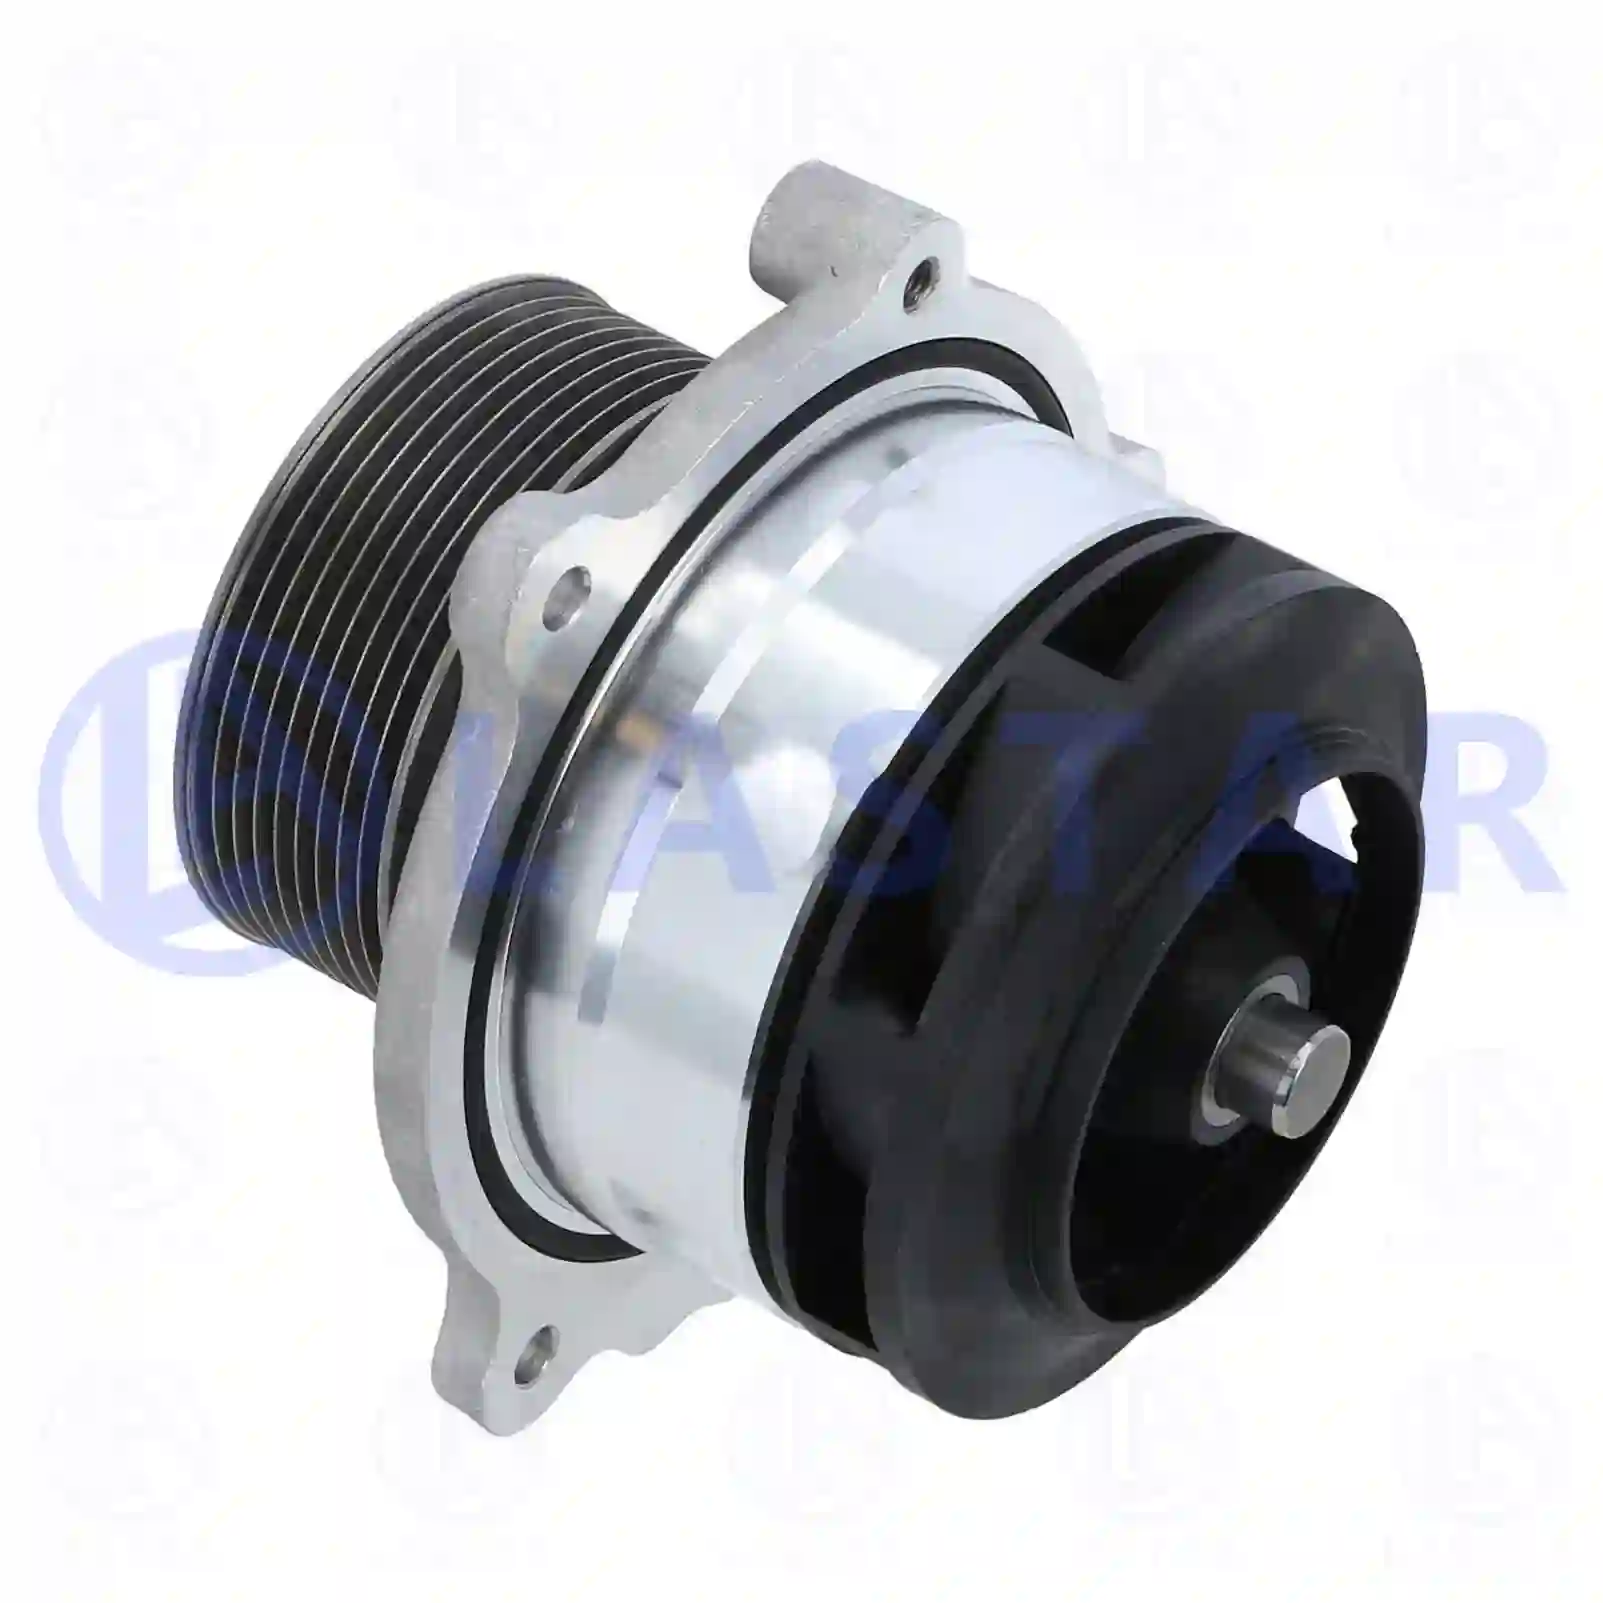 Water pump, without water tank, 77707431, 1639196, 1644762, 1649082, 1664762, 1664762A, 1664762R, 1738991, 1778280, 1778280A, 1778280R, 1828162, 1828162A, 1828162R, 1853299S, 1853300S, 931034, 931147, ZG00772-0008 ||  77707431 Lastar Spare Part | Truck Spare Parts, Auotomotive Spare Parts Water pump, without water tank, 77707431, 1639196, 1644762, 1649082, 1664762, 1664762A, 1664762R, 1738991, 1778280, 1778280A, 1778280R, 1828162, 1828162A, 1828162R, 1853299S, 1853300S, 931034, 931147, ZG00772-0008 ||  77707431 Lastar Spare Part | Truck Spare Parts, Auotomotive Spare Parts